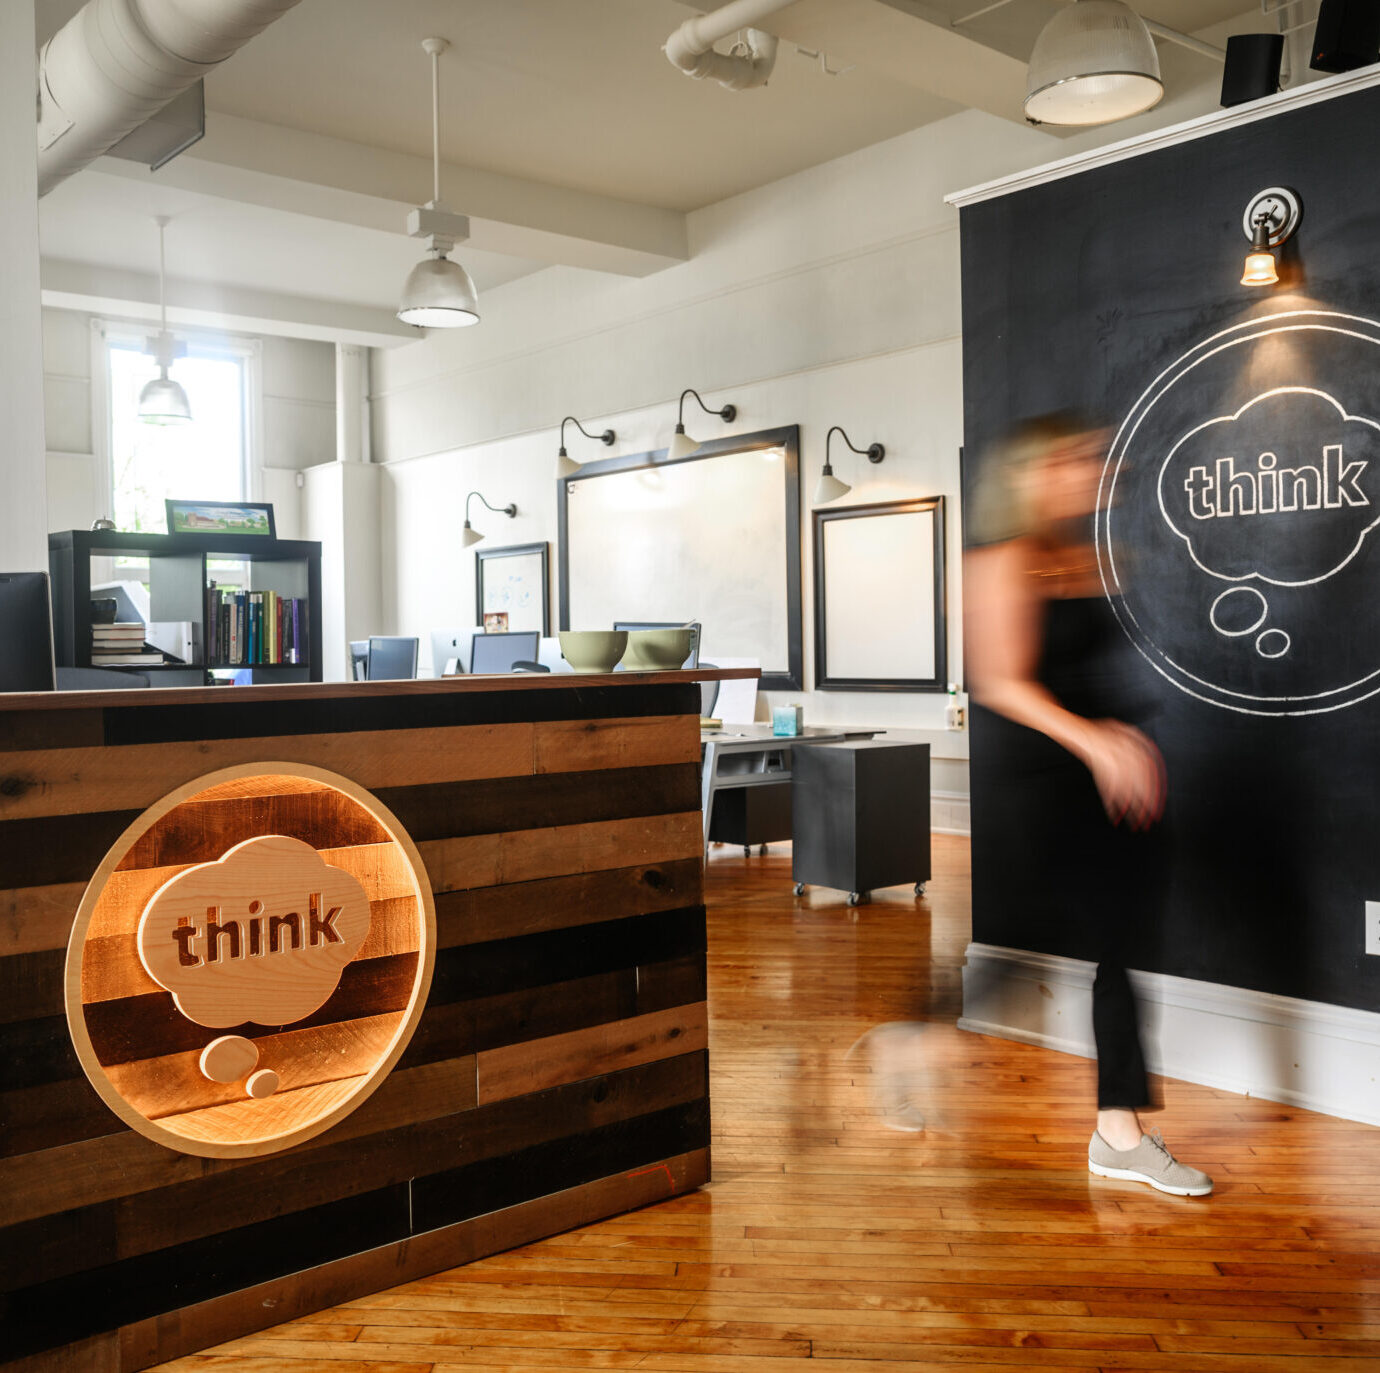 front desk with think logo and blurry person walking by